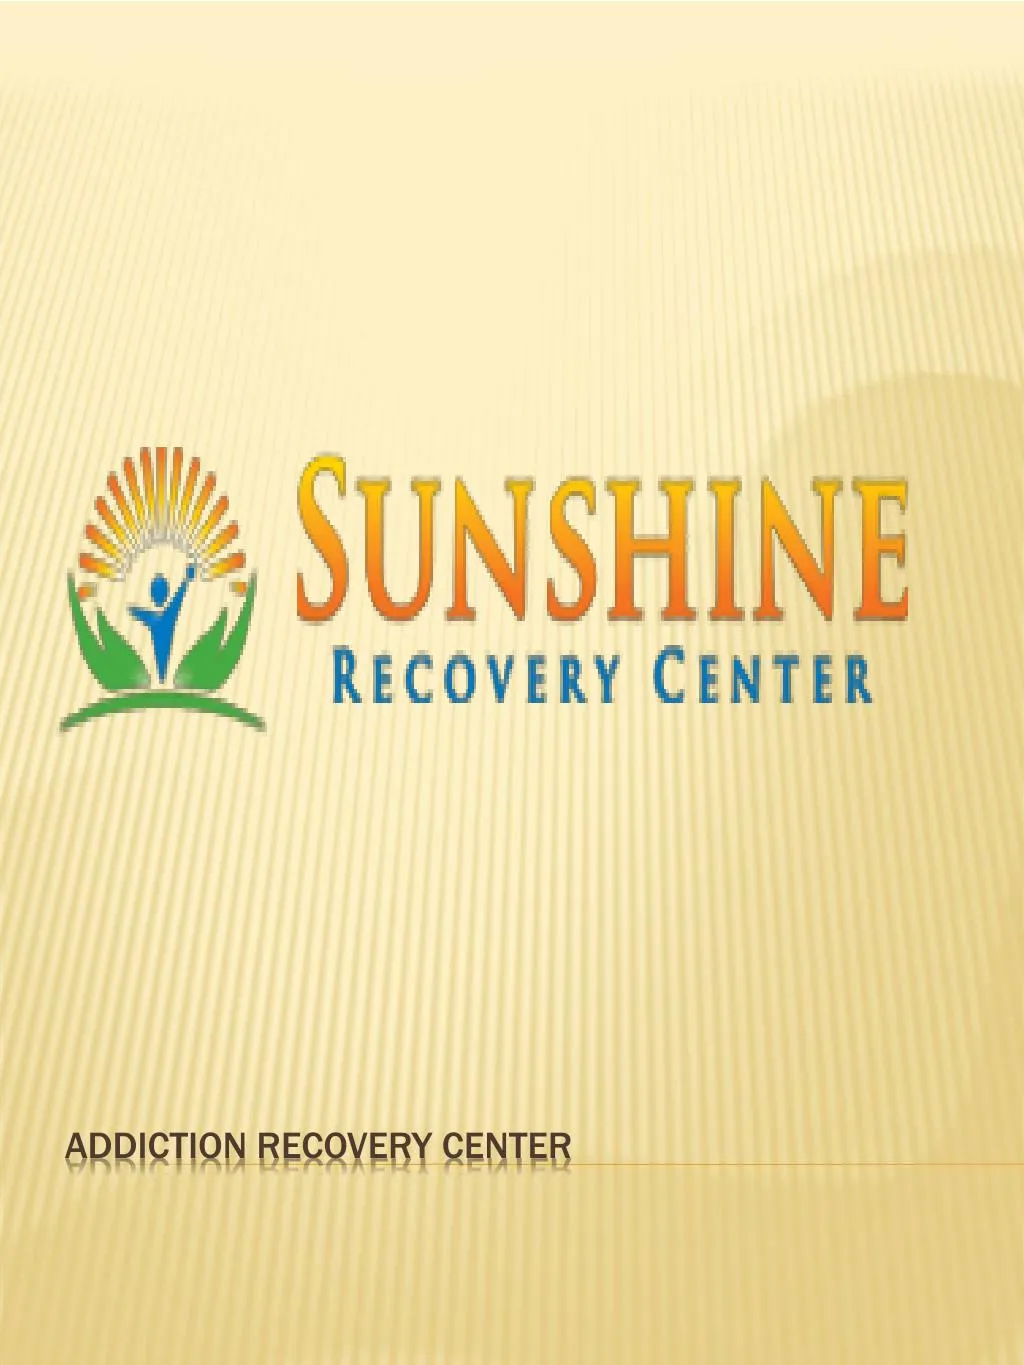 addiction recovery center n.